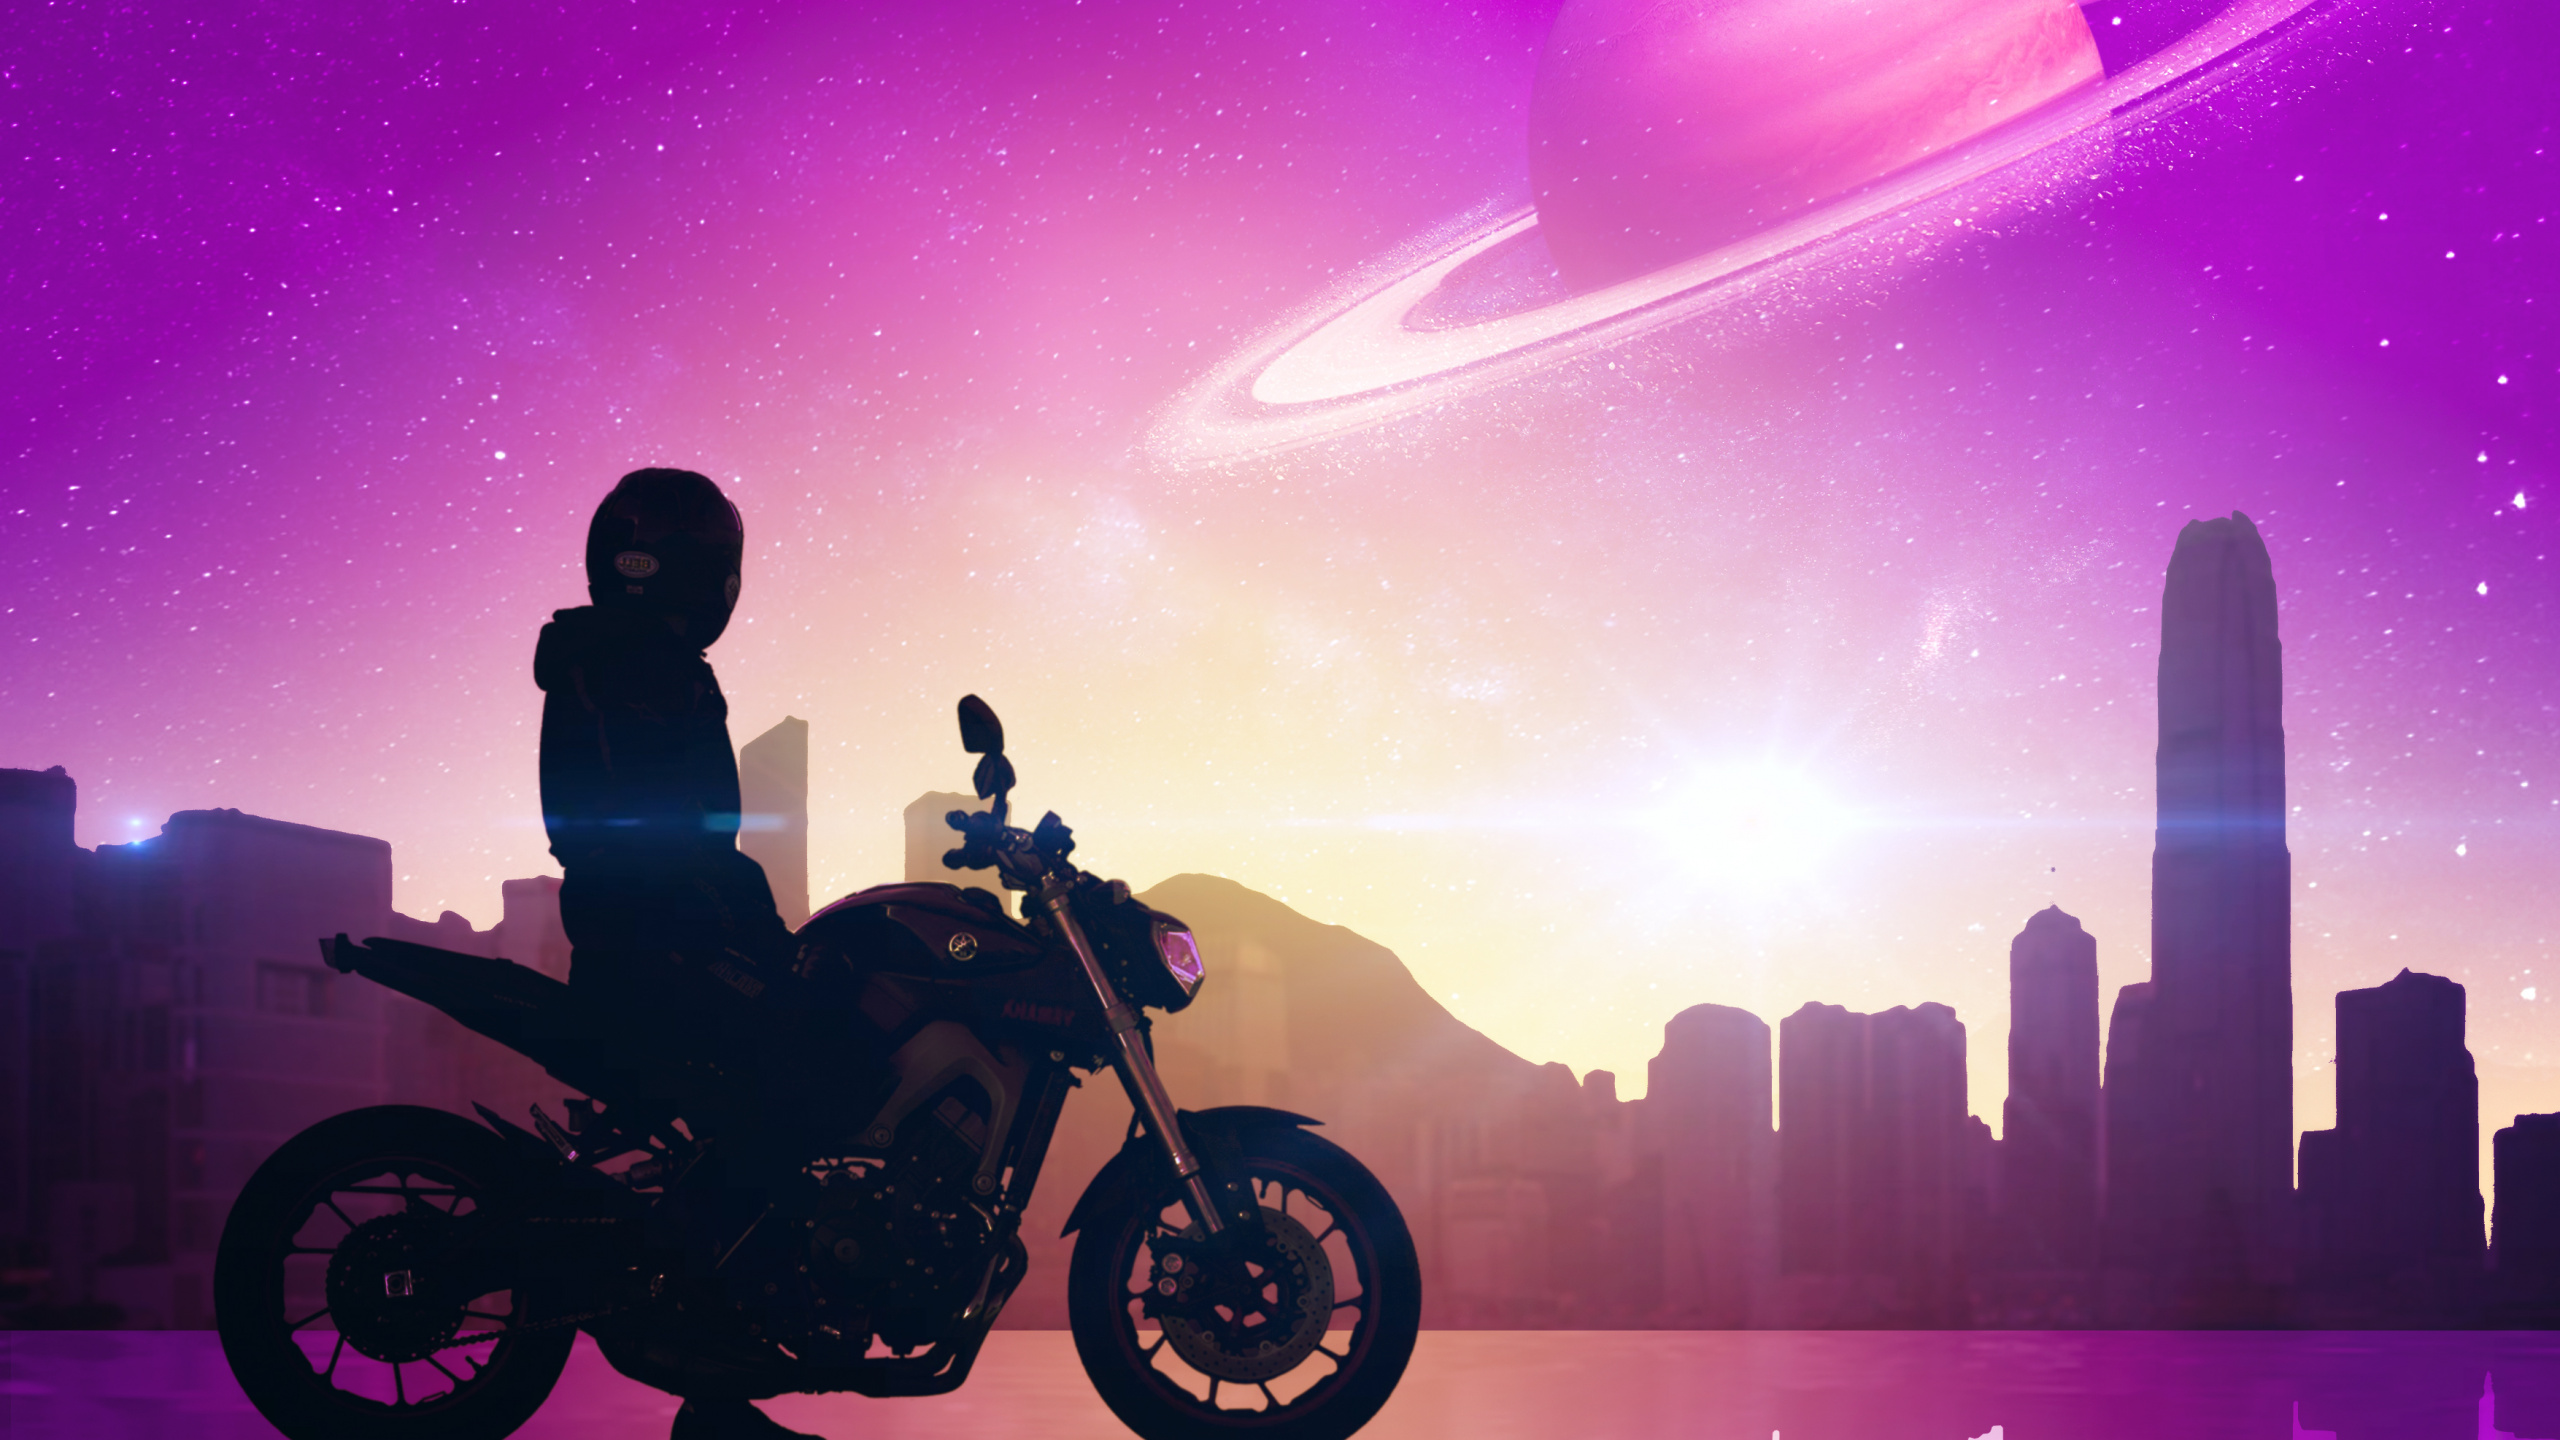 Man Riding Motorcycle During Night Time. Wallpaper in 2560x1440 Resolution